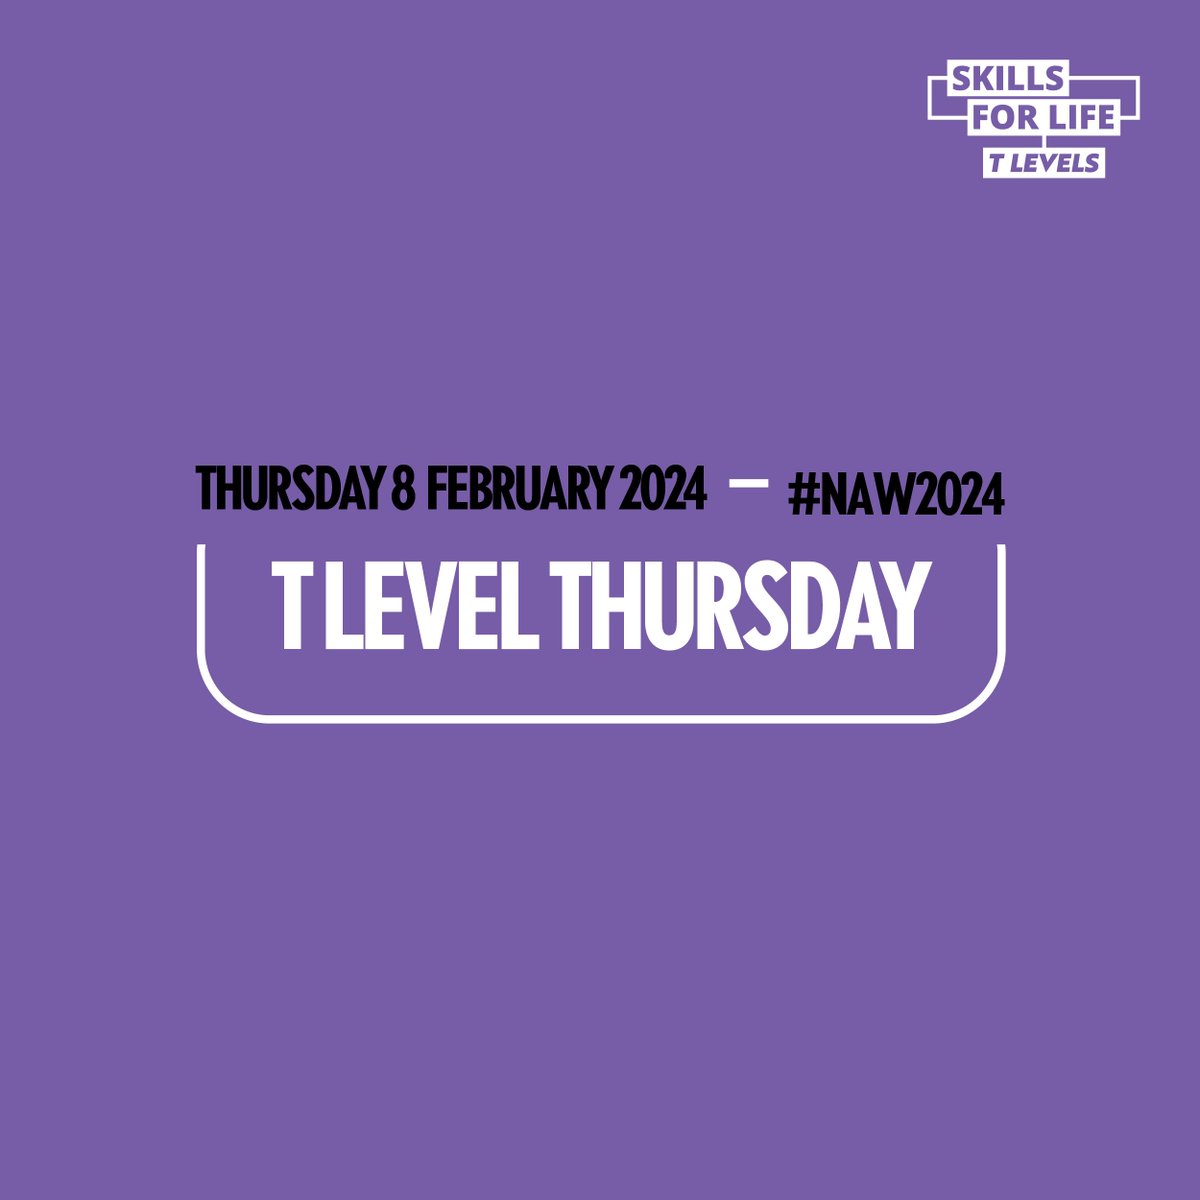 Have you heard about T-Levels? These are great options for 16-19-year-olds to develop technical & vocational skills, as useful as 3 A-levels, with work experience. Choose from 18 subjects & get at least 45 days on the job training. tlevels.gov.uk to learn more. #NAW2024